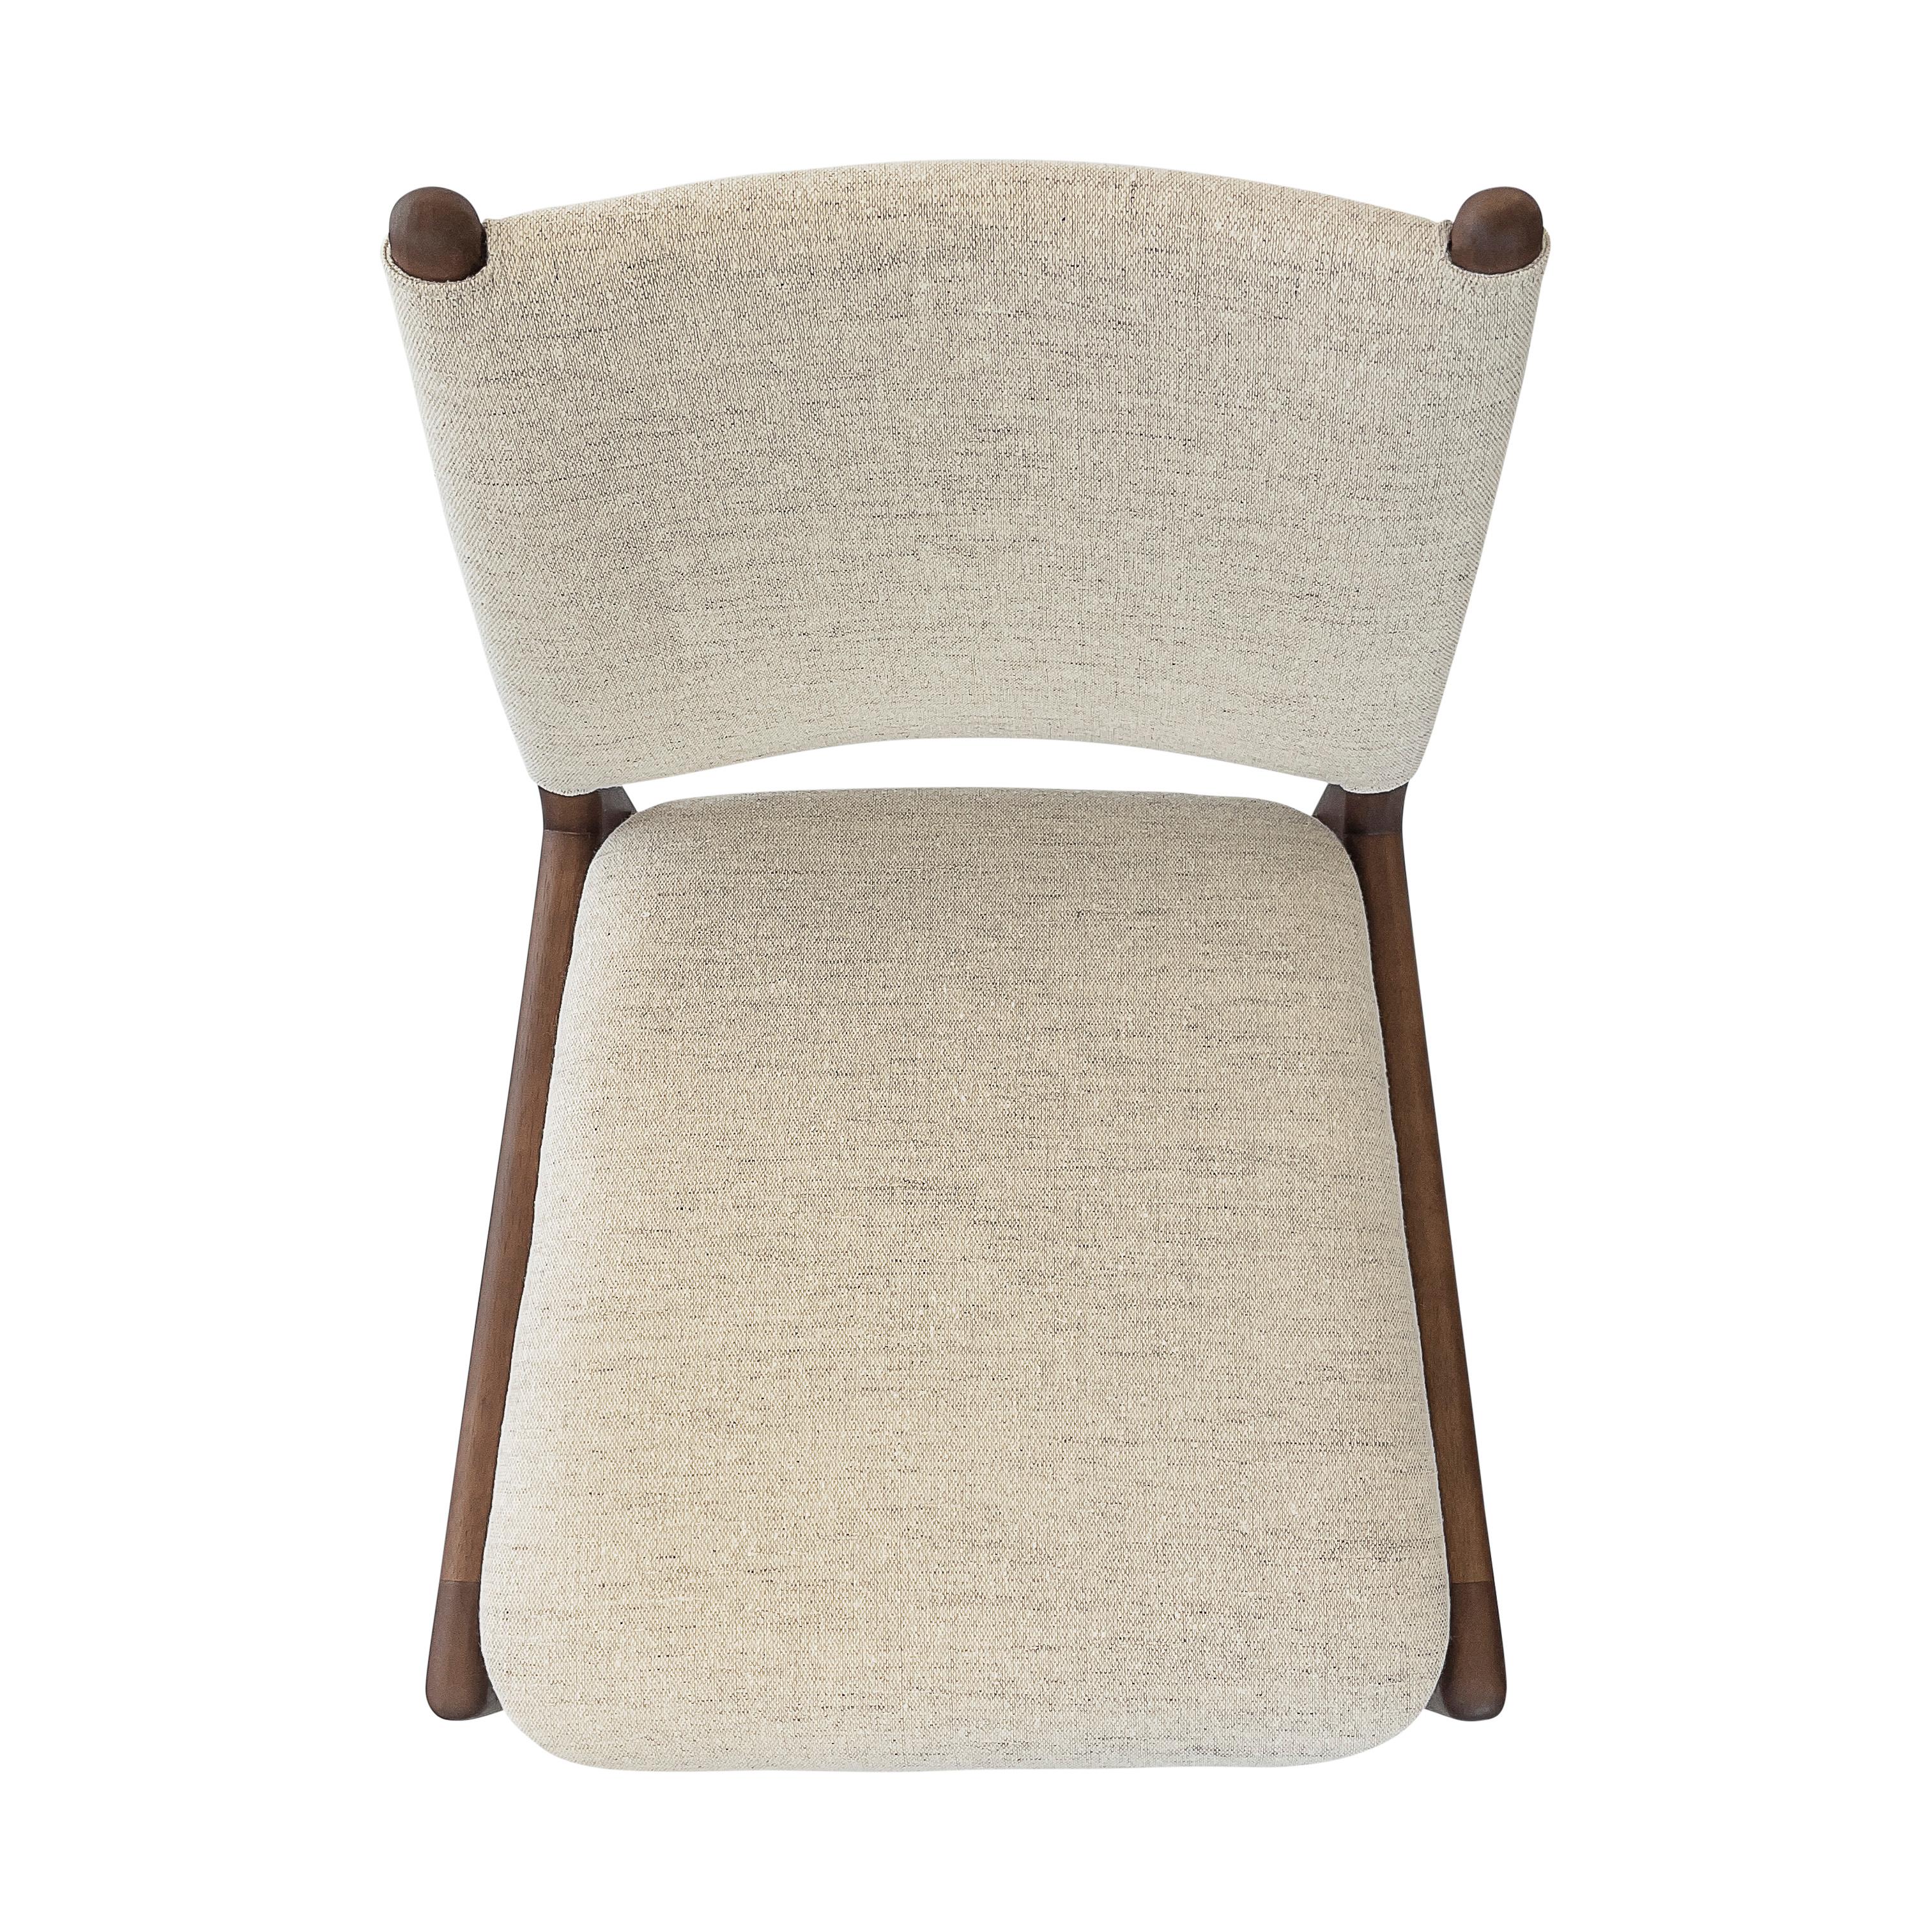 Brazilian Cappio Dining Chair in Walnut Wood Finish with Light Beige Fabric, set of 2 For Sale